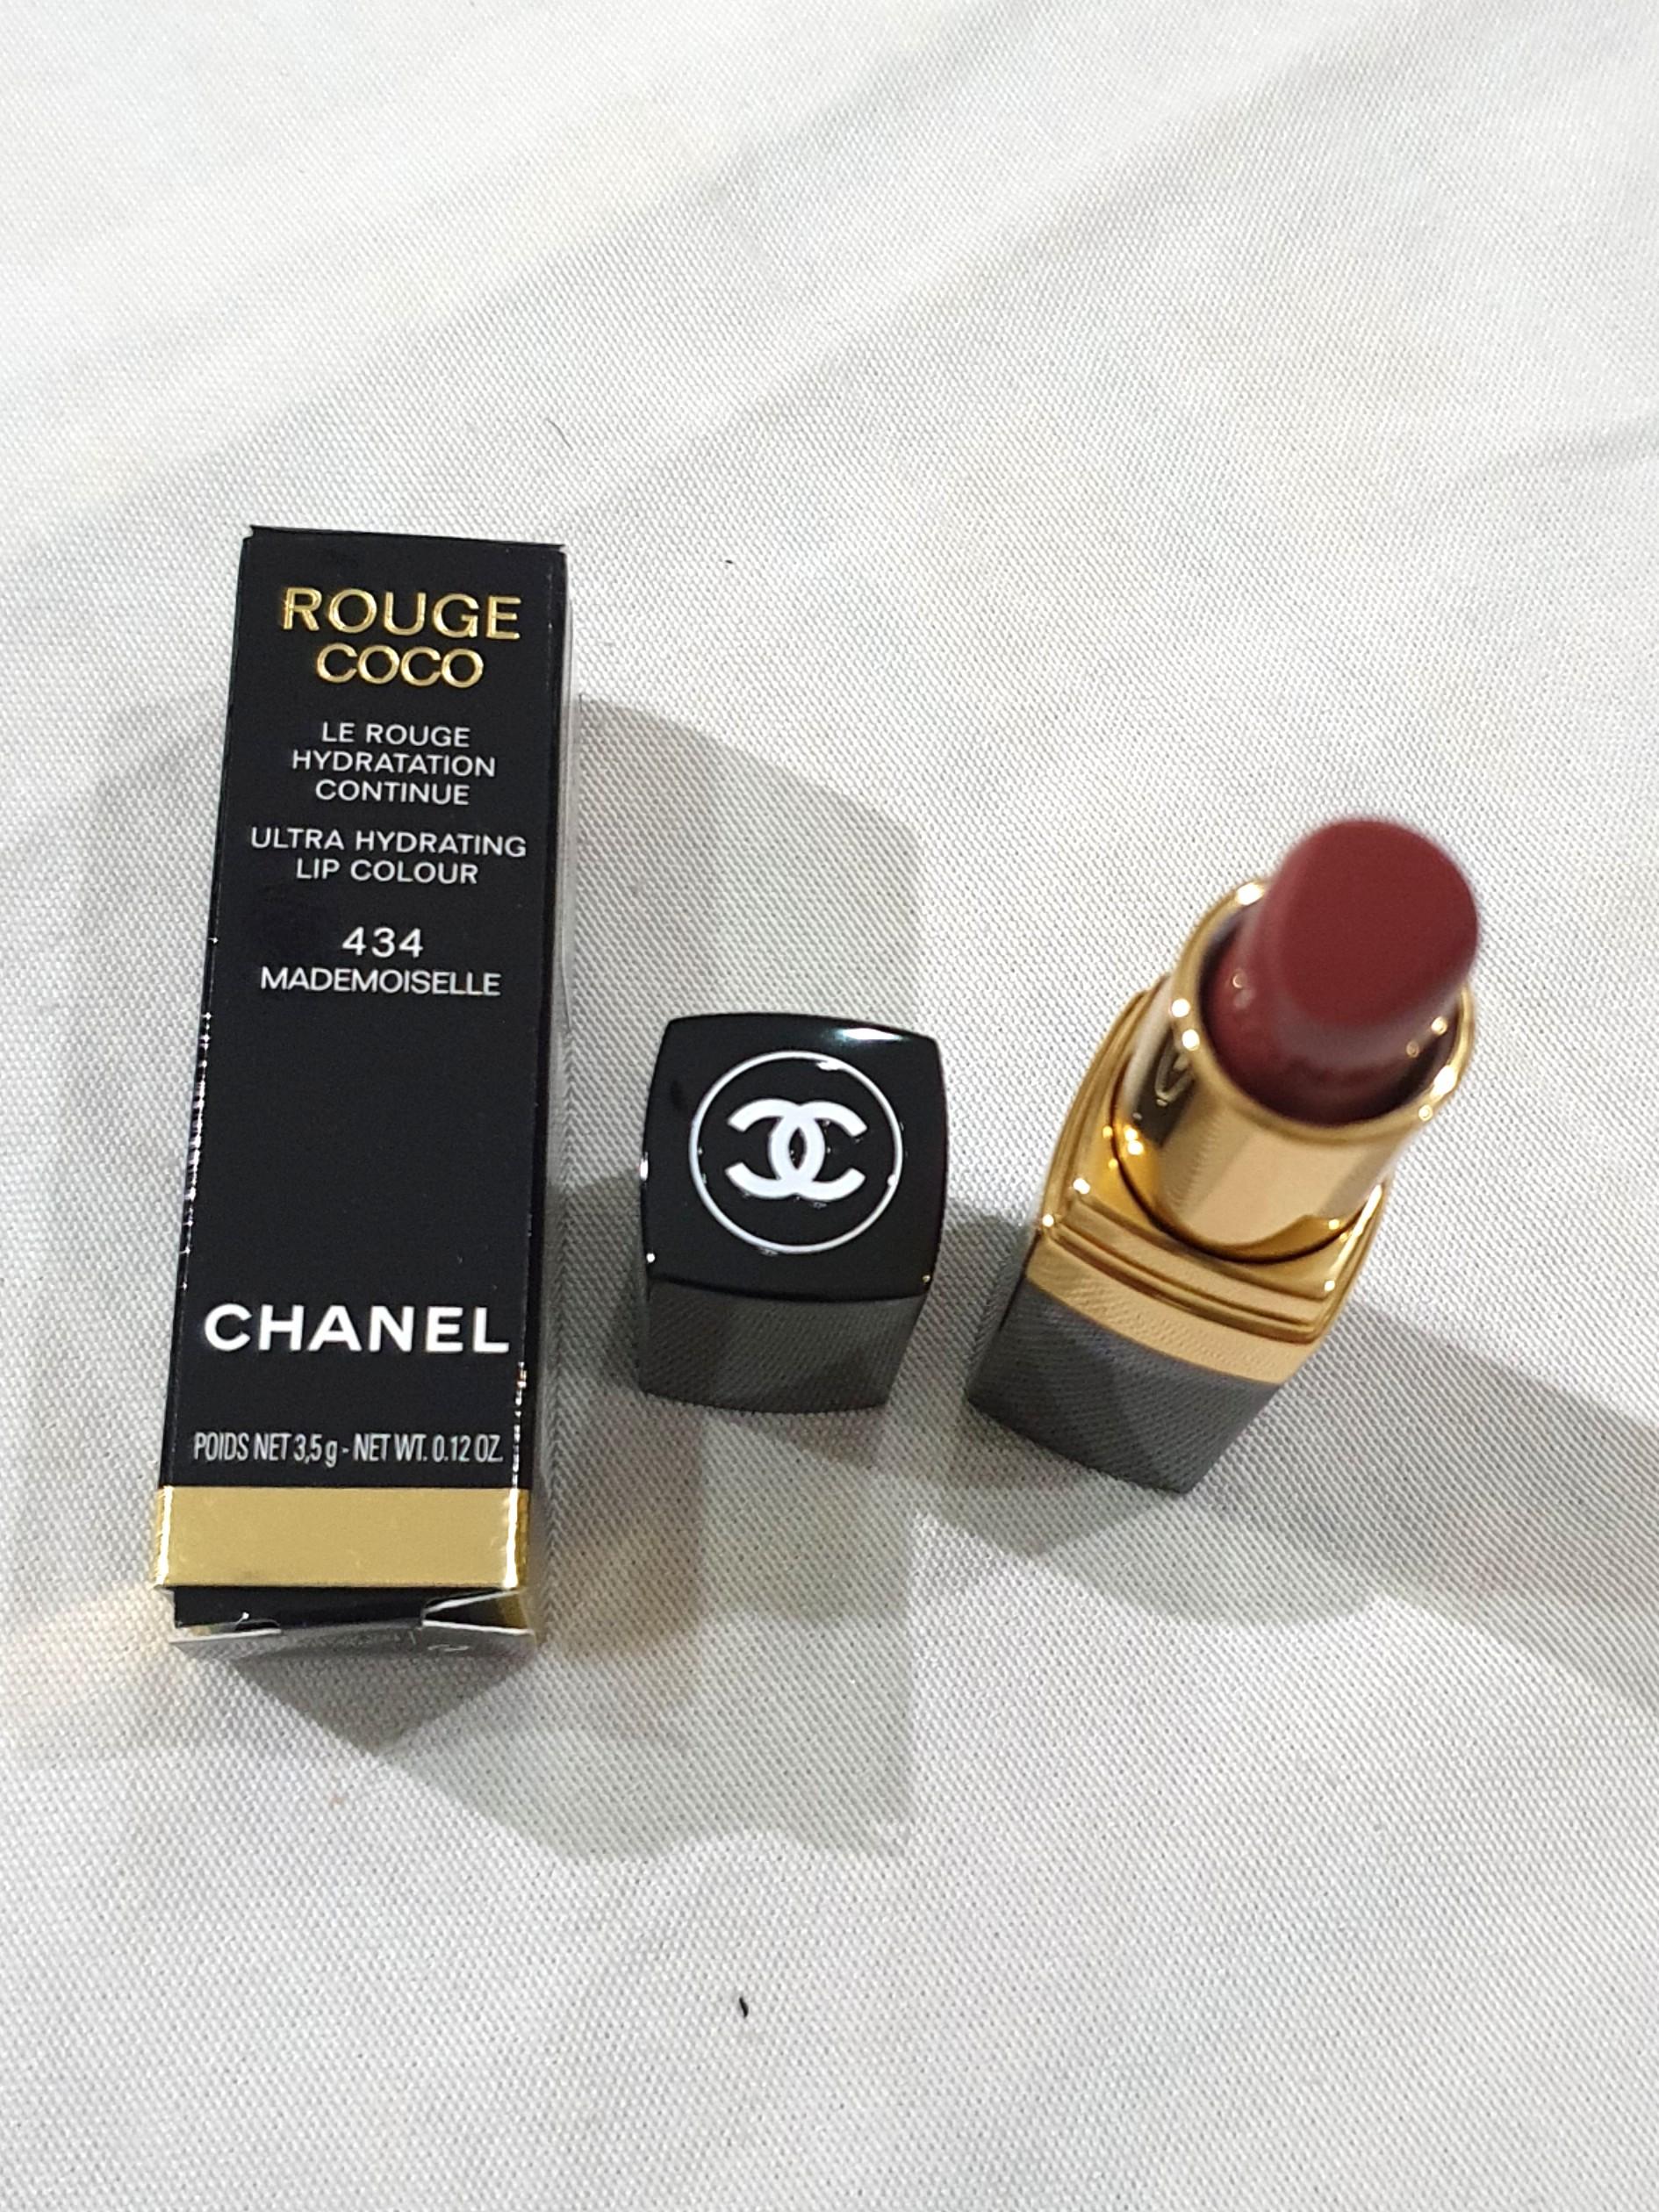 CHANEL Authentic, Rouge Coco 434 Mademoiselle Lipstick, Beauty